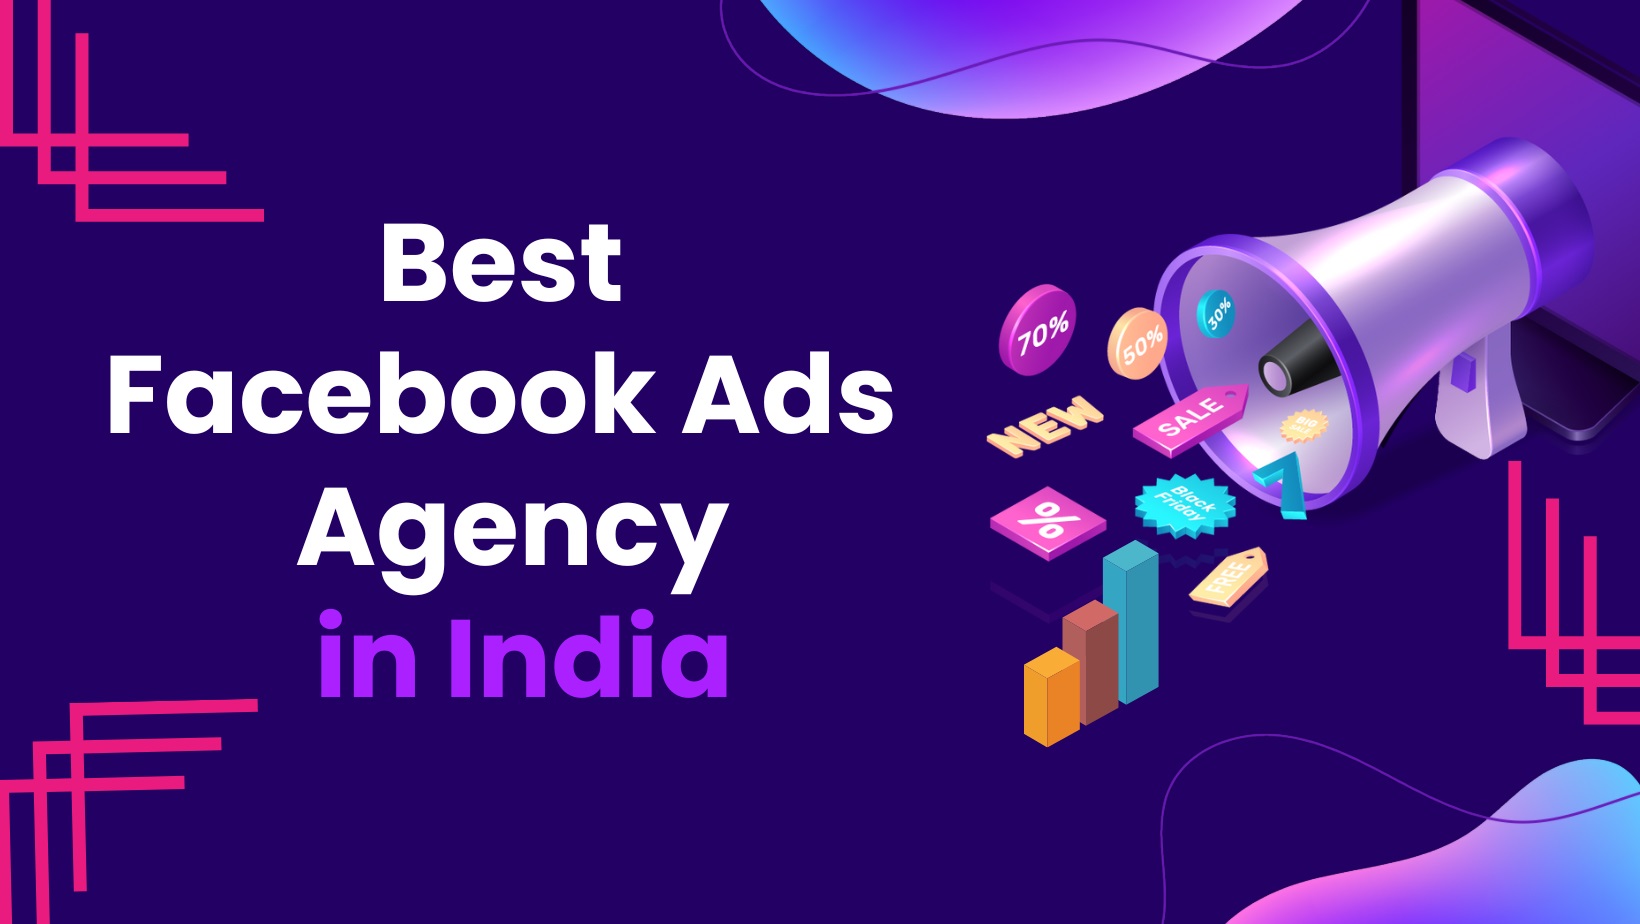 facebook marketing service, facebook marketing techniques, benefits of a facebook business page, facebook marketing services delhi, facebook advertising in delhi, facebook advertising techniques, facebook ad agency india, facebook marketing services india, benefits of facebook business page, benefits of facebook marketing